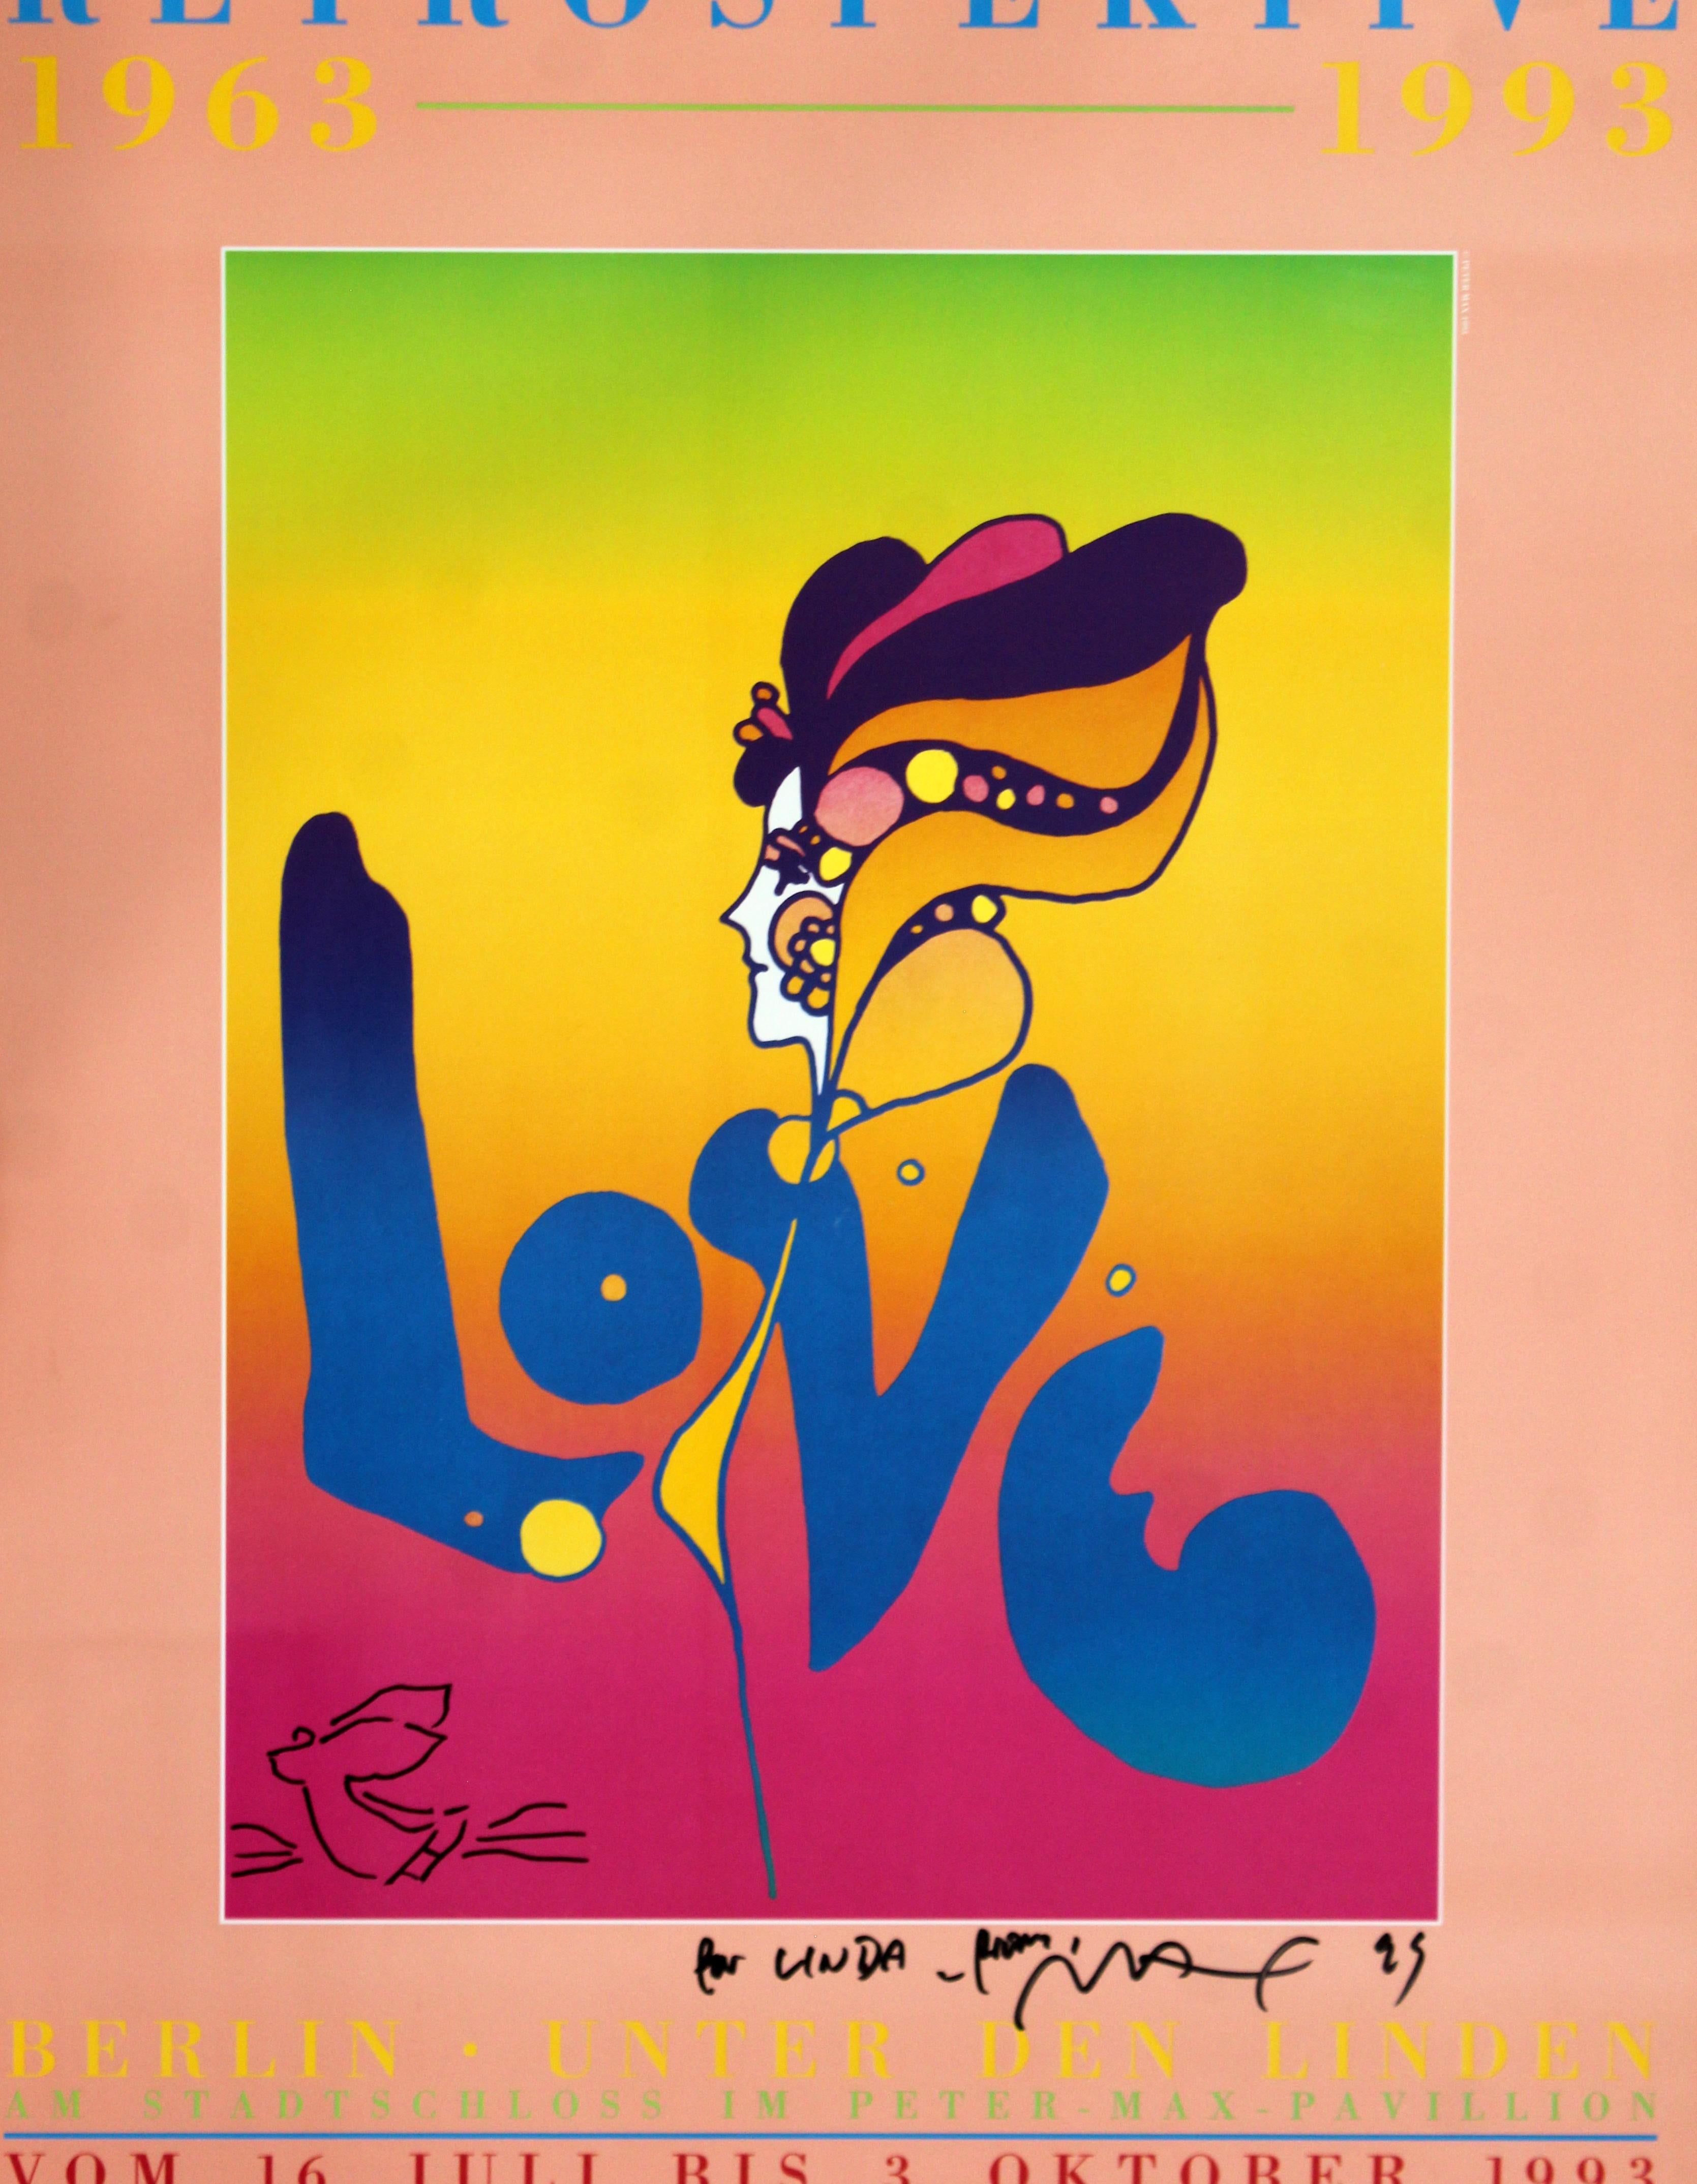 For your consideration is a dynamic, framed poster, for Peter Max's Berlin retrospektive of his work during the years 1963-1993, signed by the artist with a COA. In excellent condition. The dimensions are 25